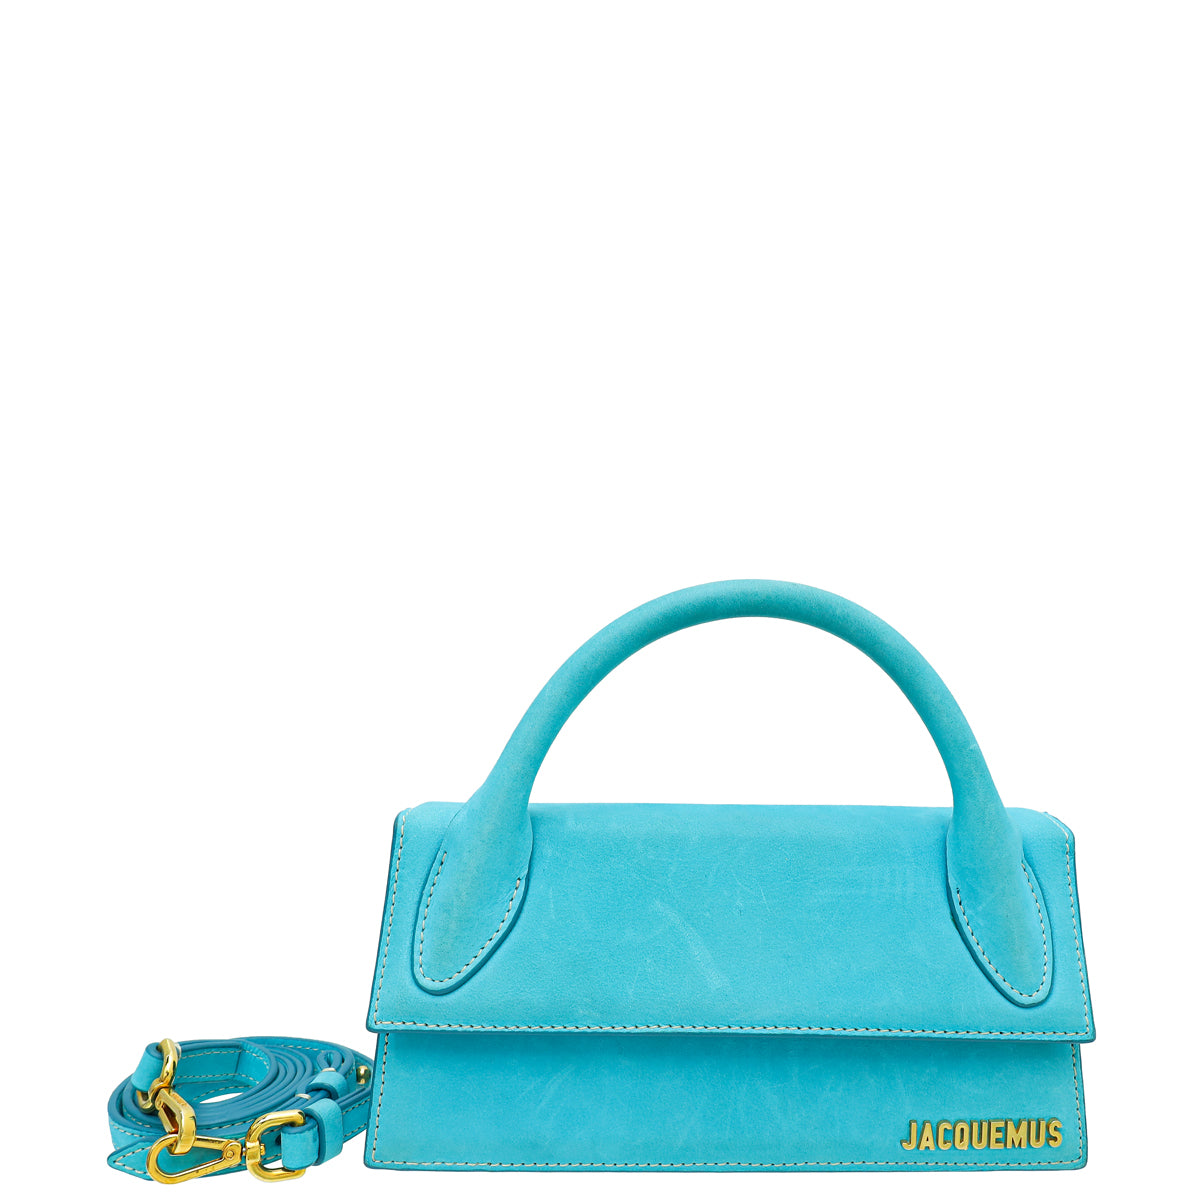 Jacquemus Turquoise Suede Le Chiquito Long Top Handle Bag